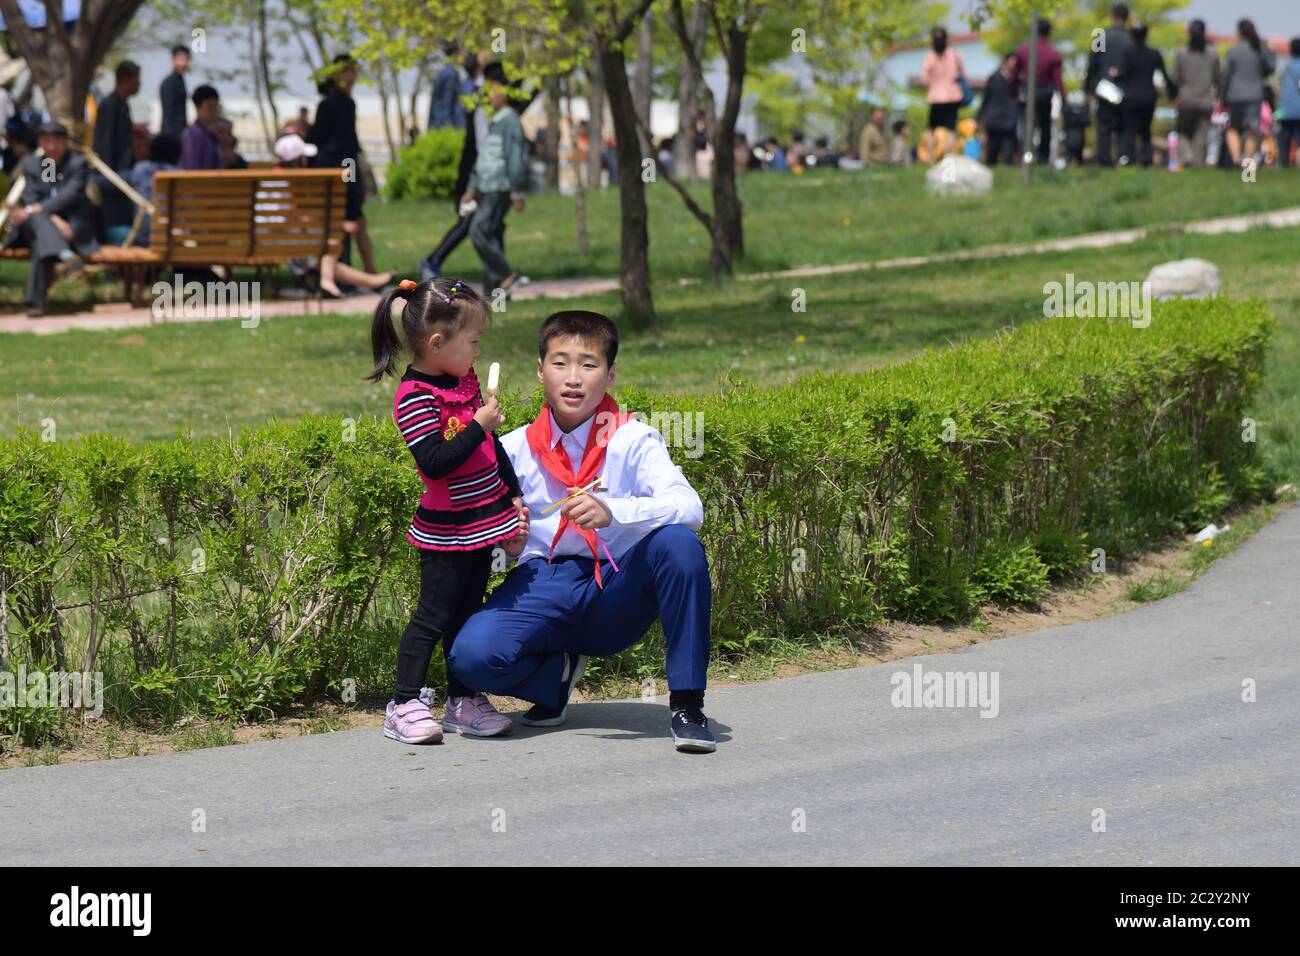 Pyongyang, North Korea - May 1, 2019: Young boy, member of the Young Pioneer Corps and his little sister with ice cream on a city street Stock Photo